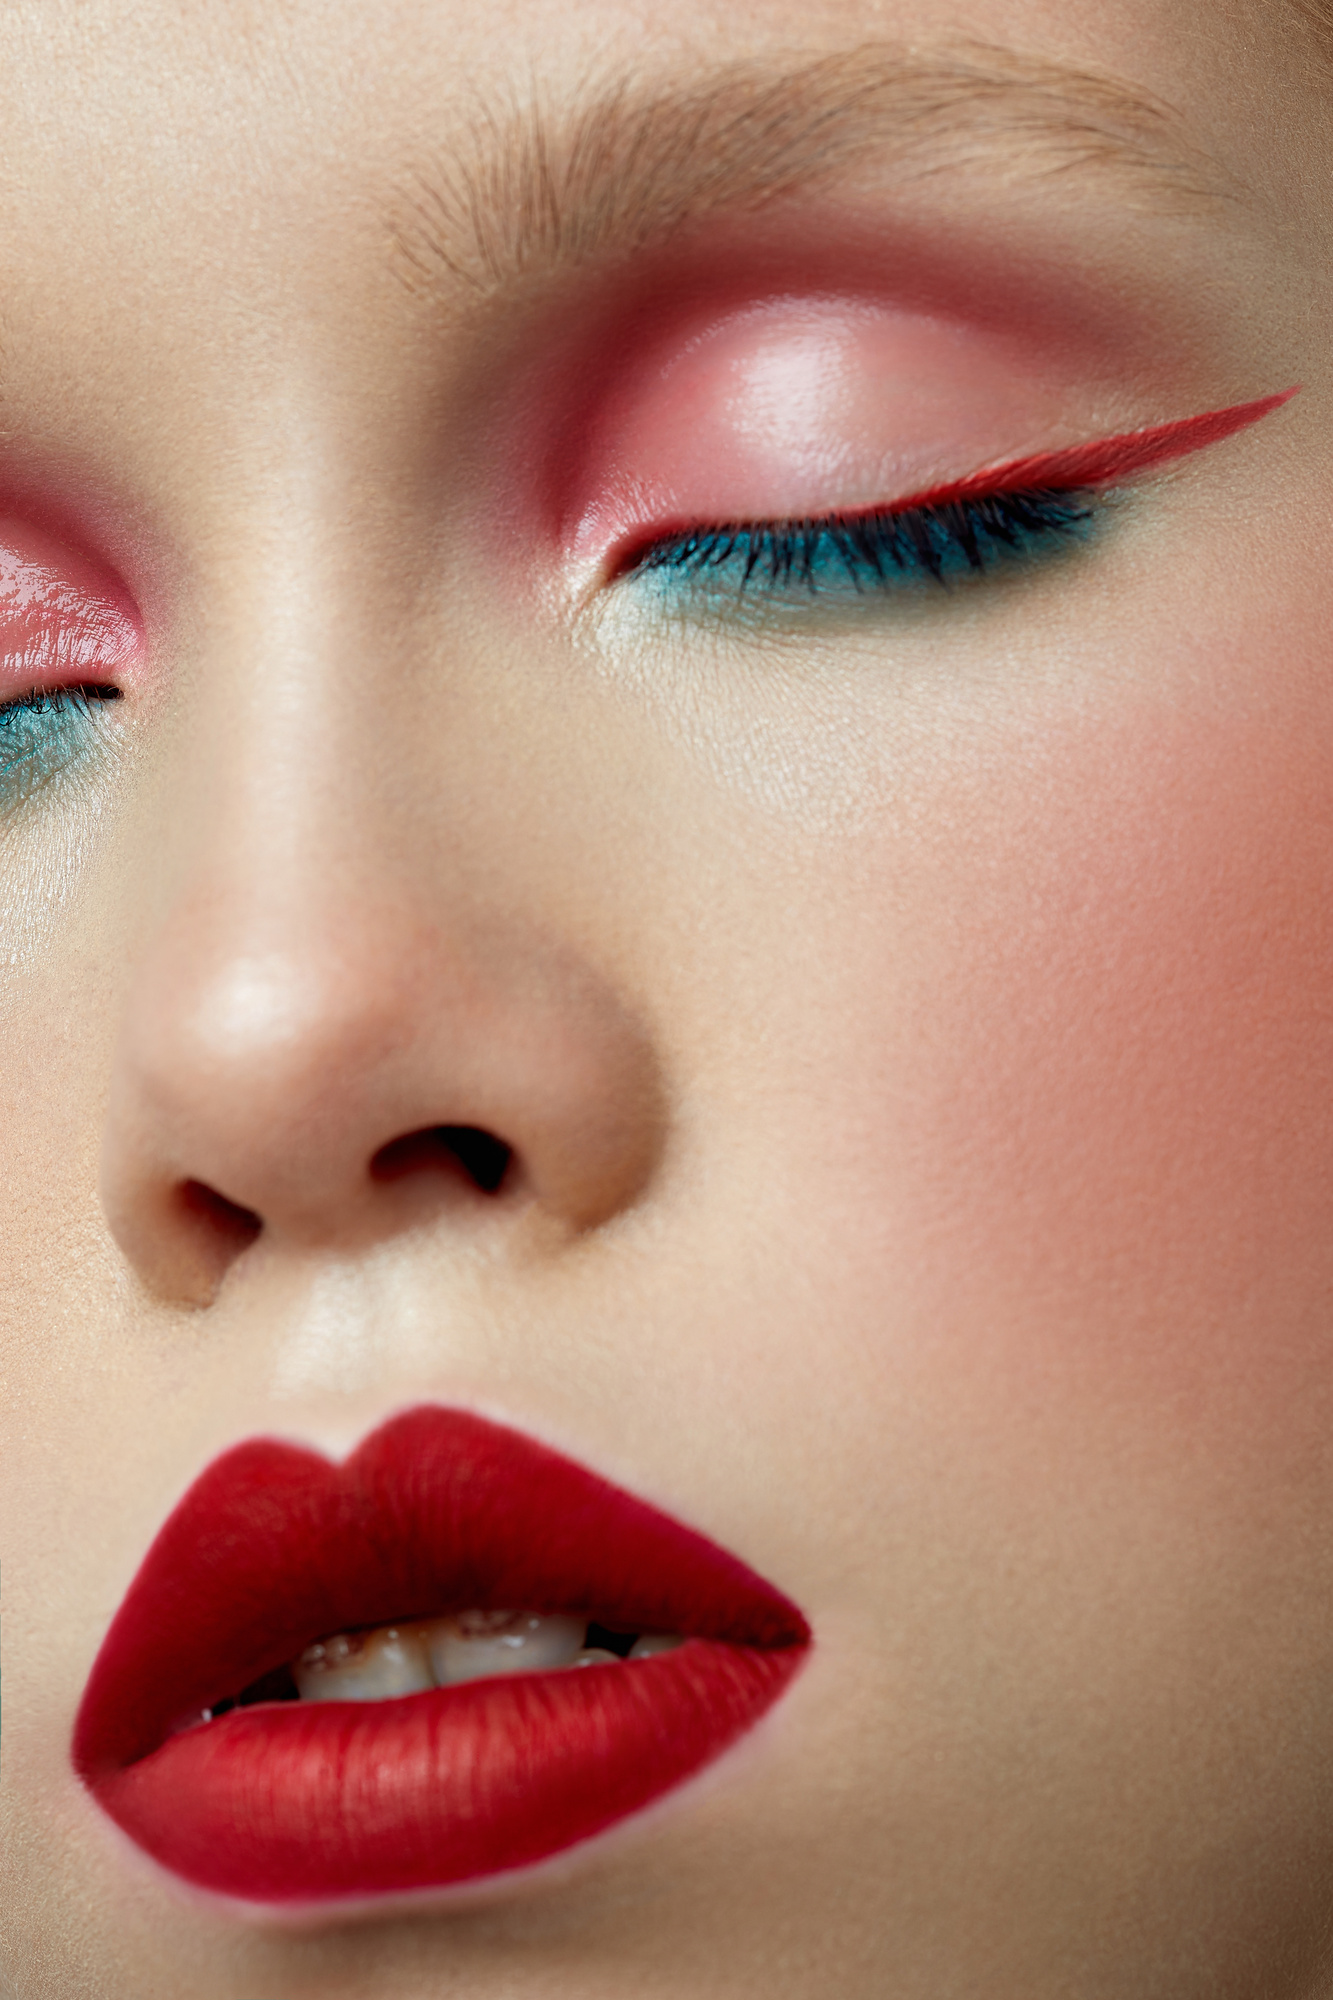 7 Makeup Trends That Will Dominate in 2022